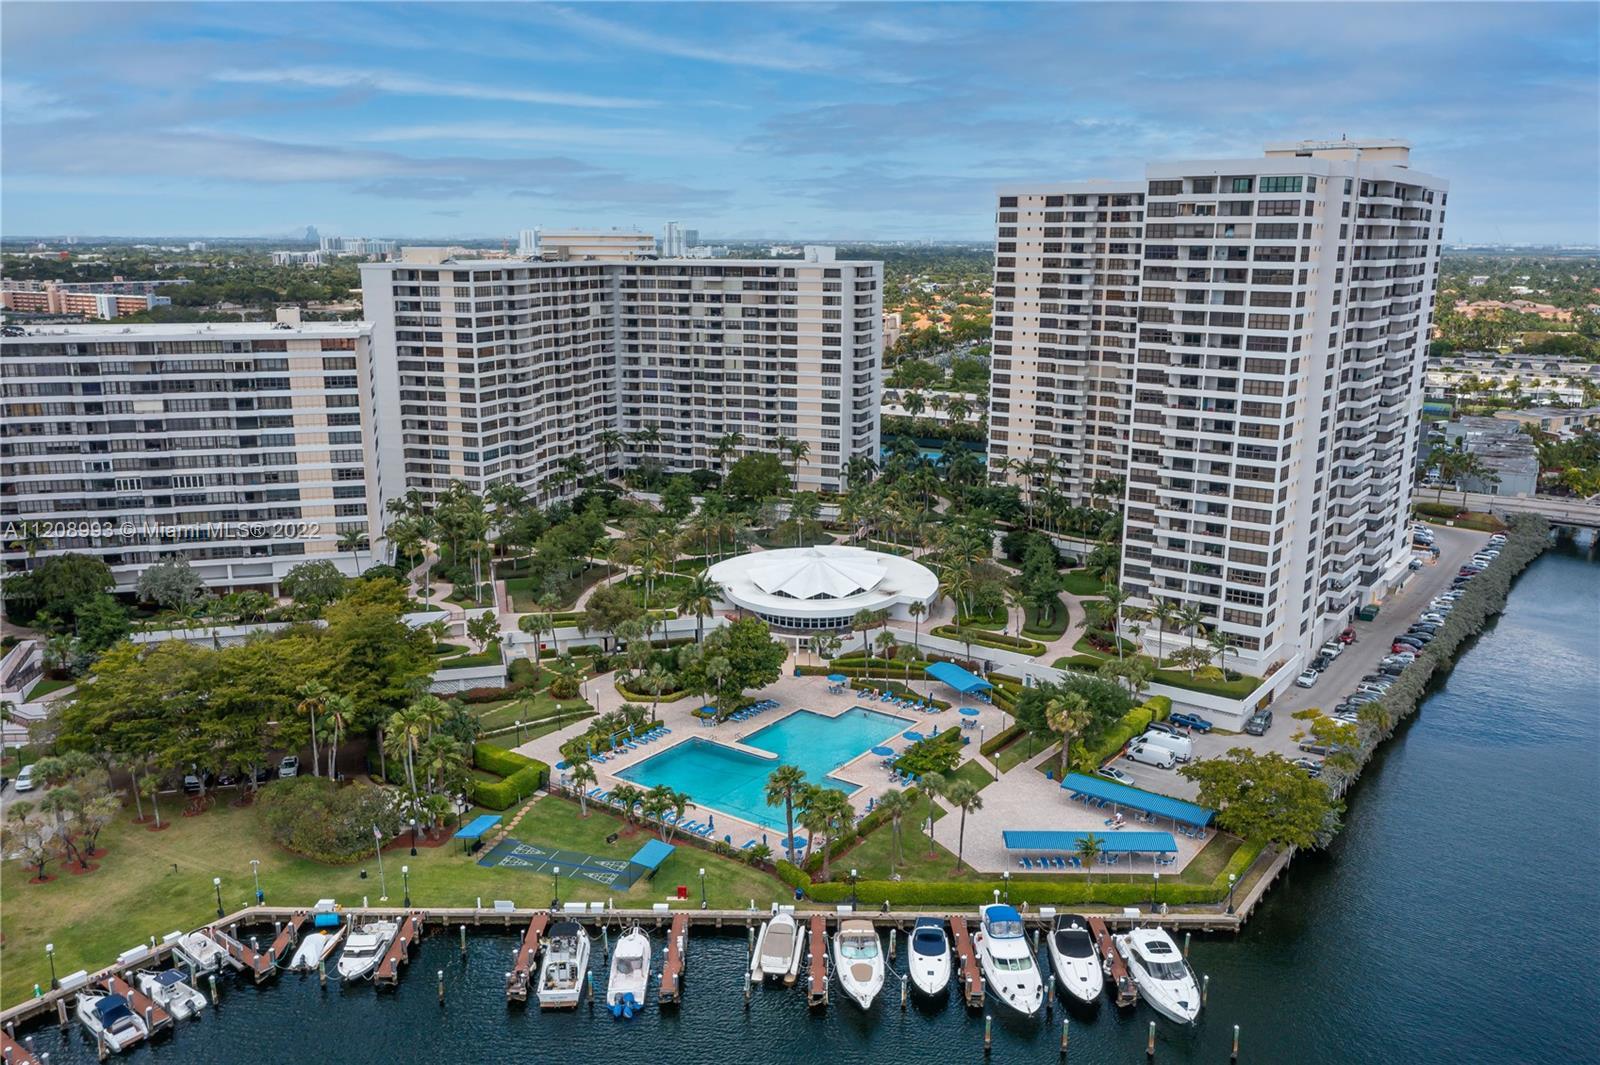 Vacant 2/2 furnished apt. with beautiful intracoastal and marina water views. Large bedrooms with pl